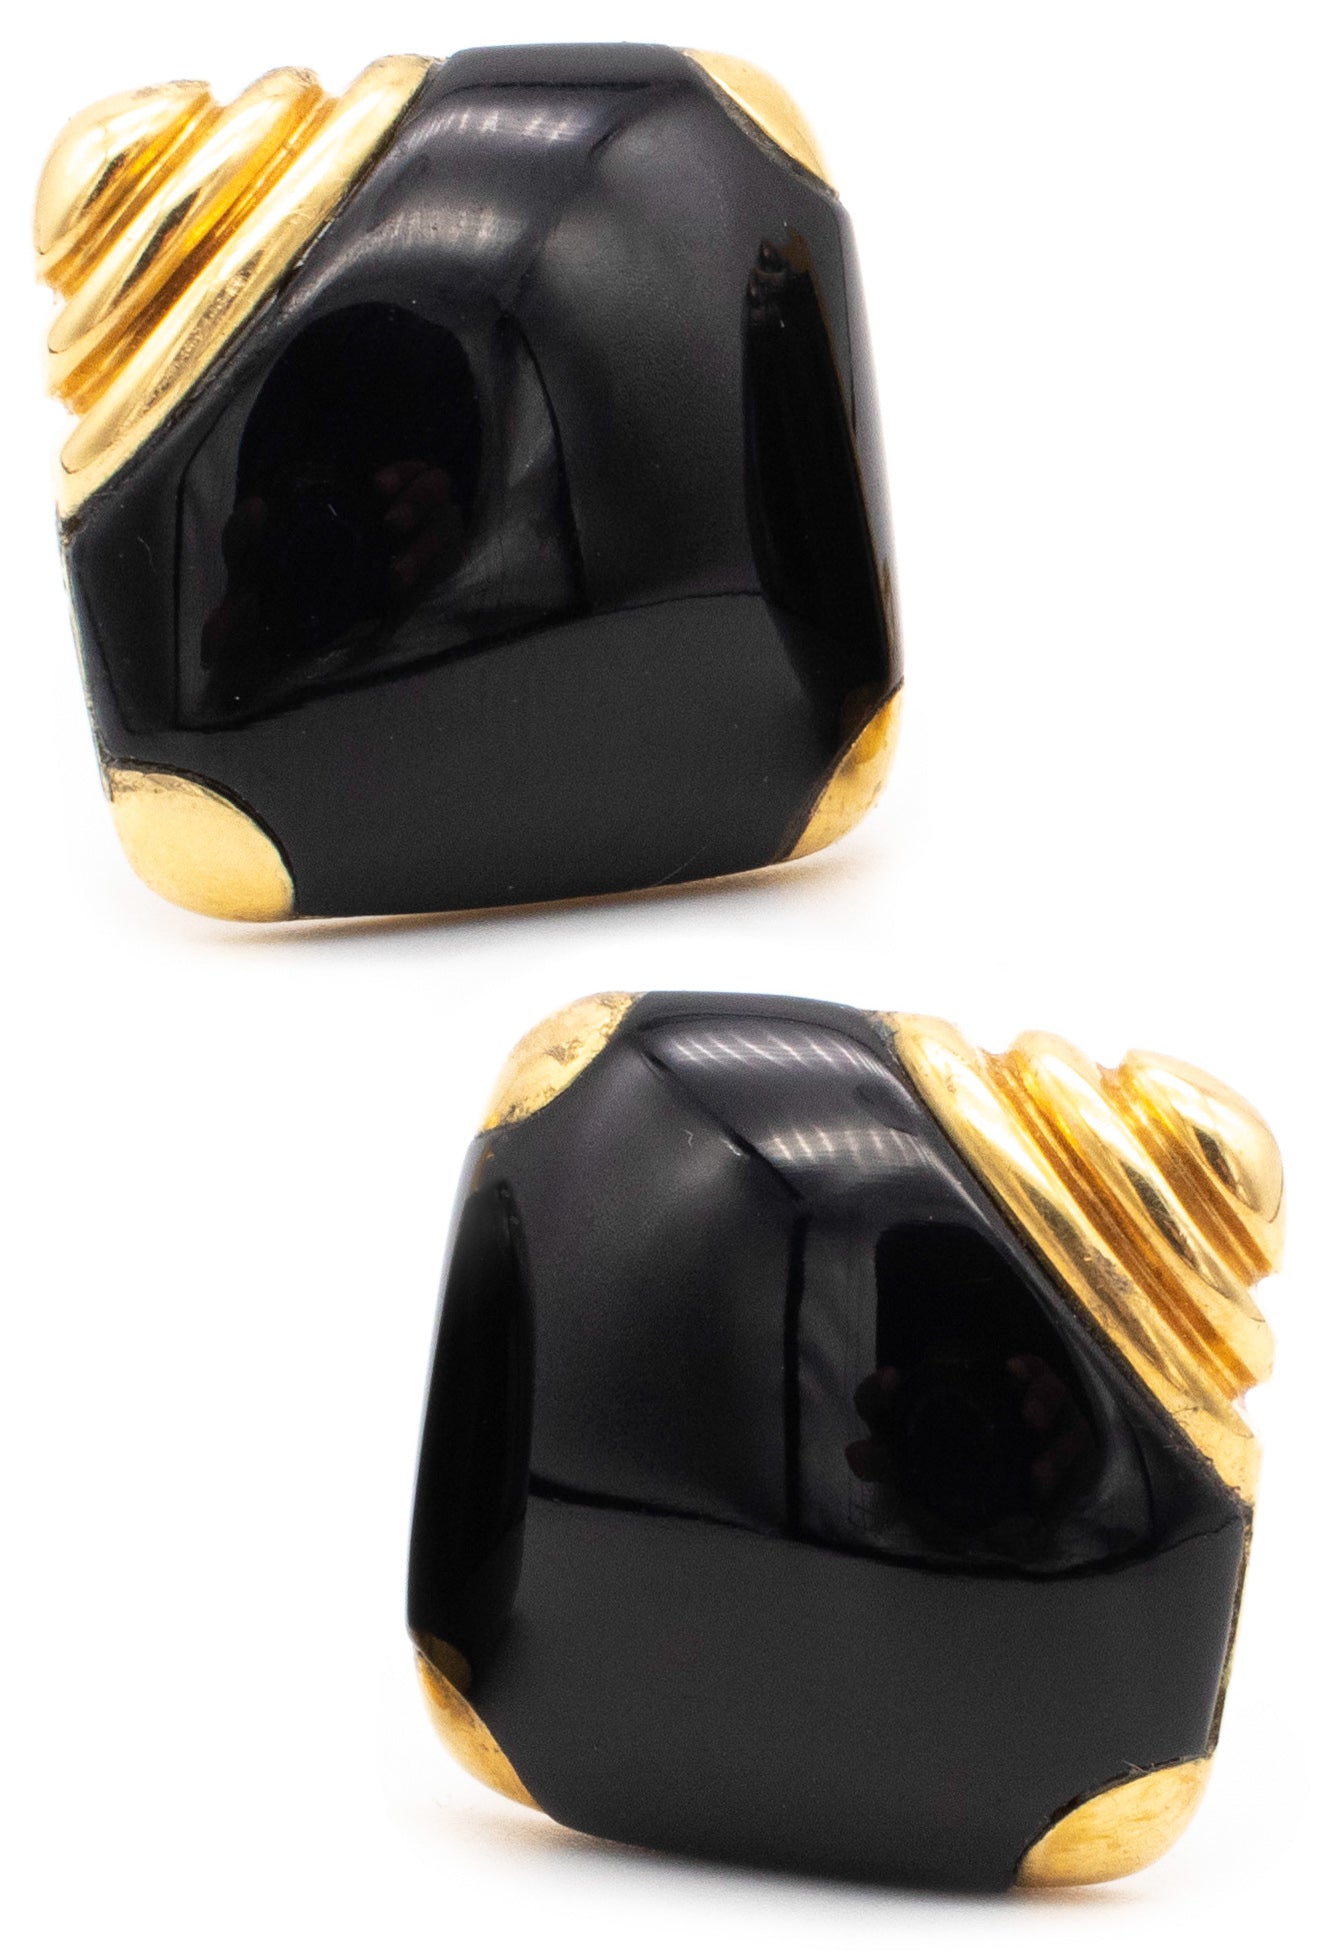 CARTIER 1960-70'S RETRO SQUARED 18 KT GOLD EARRINGS WITH BLACK ONYX